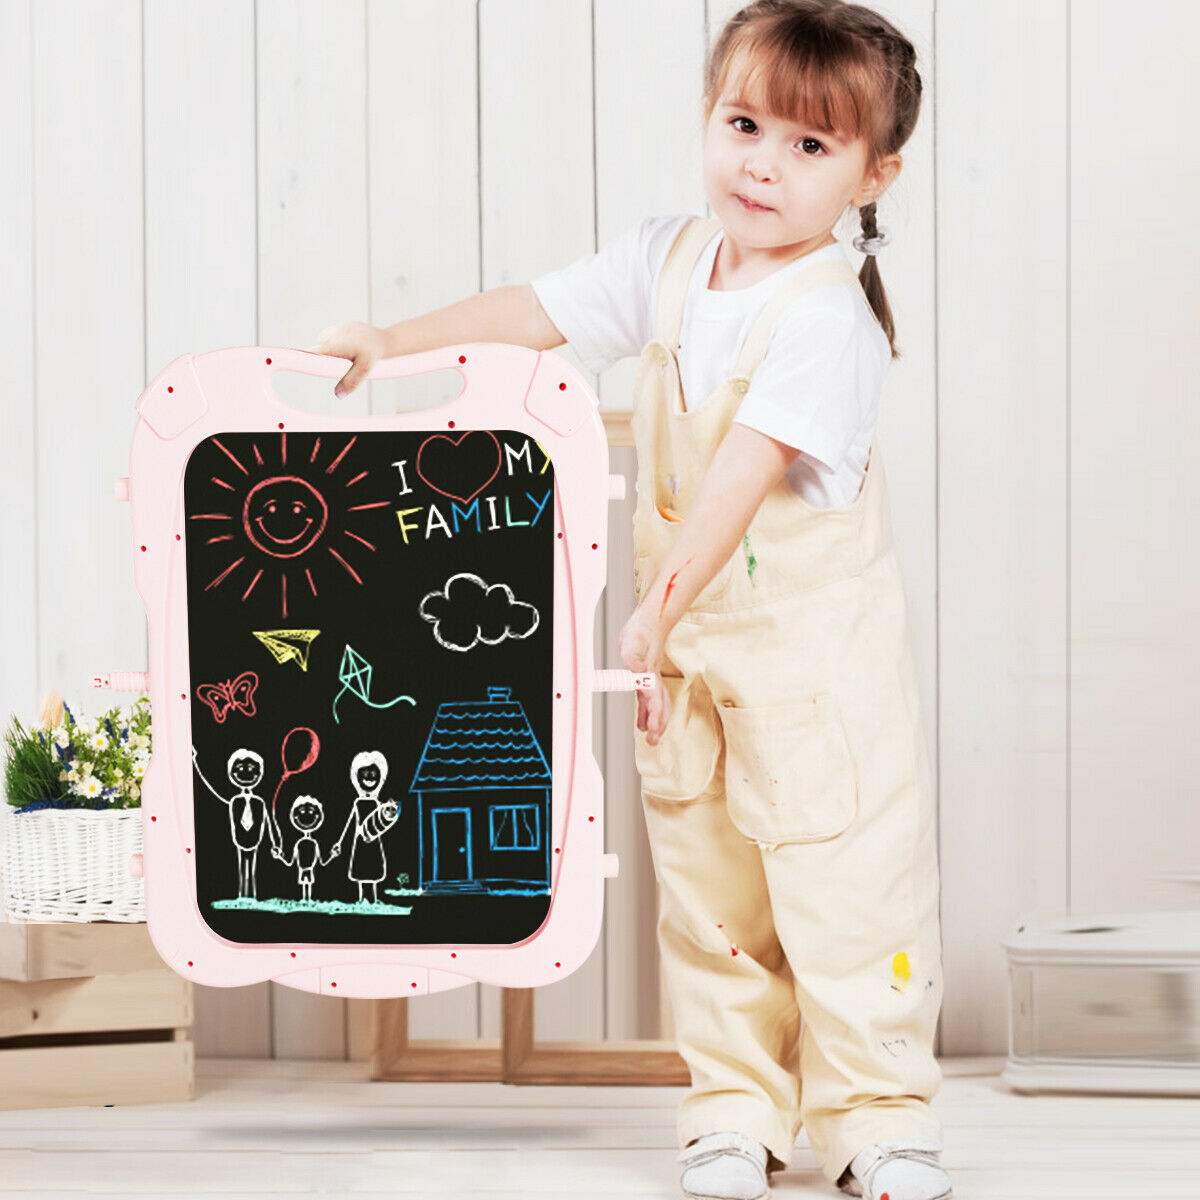 Gymax Kids Art Easel w/Paper Roll Double-Sided Adjustable Drawing Easel  Board